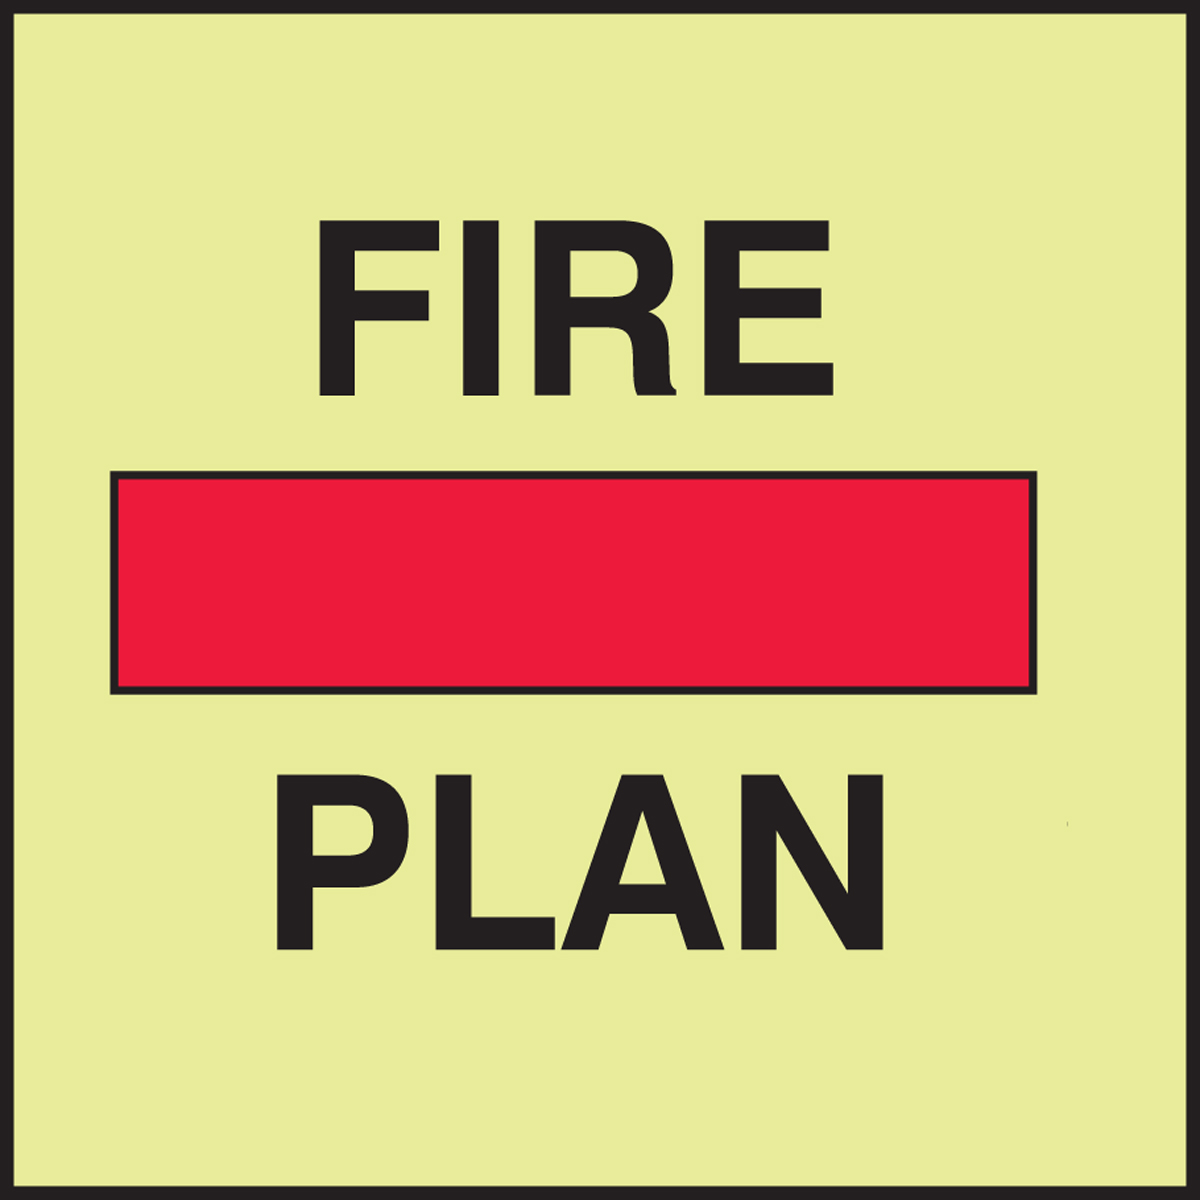 FIRE CONTROL AND SAFETY PLAN